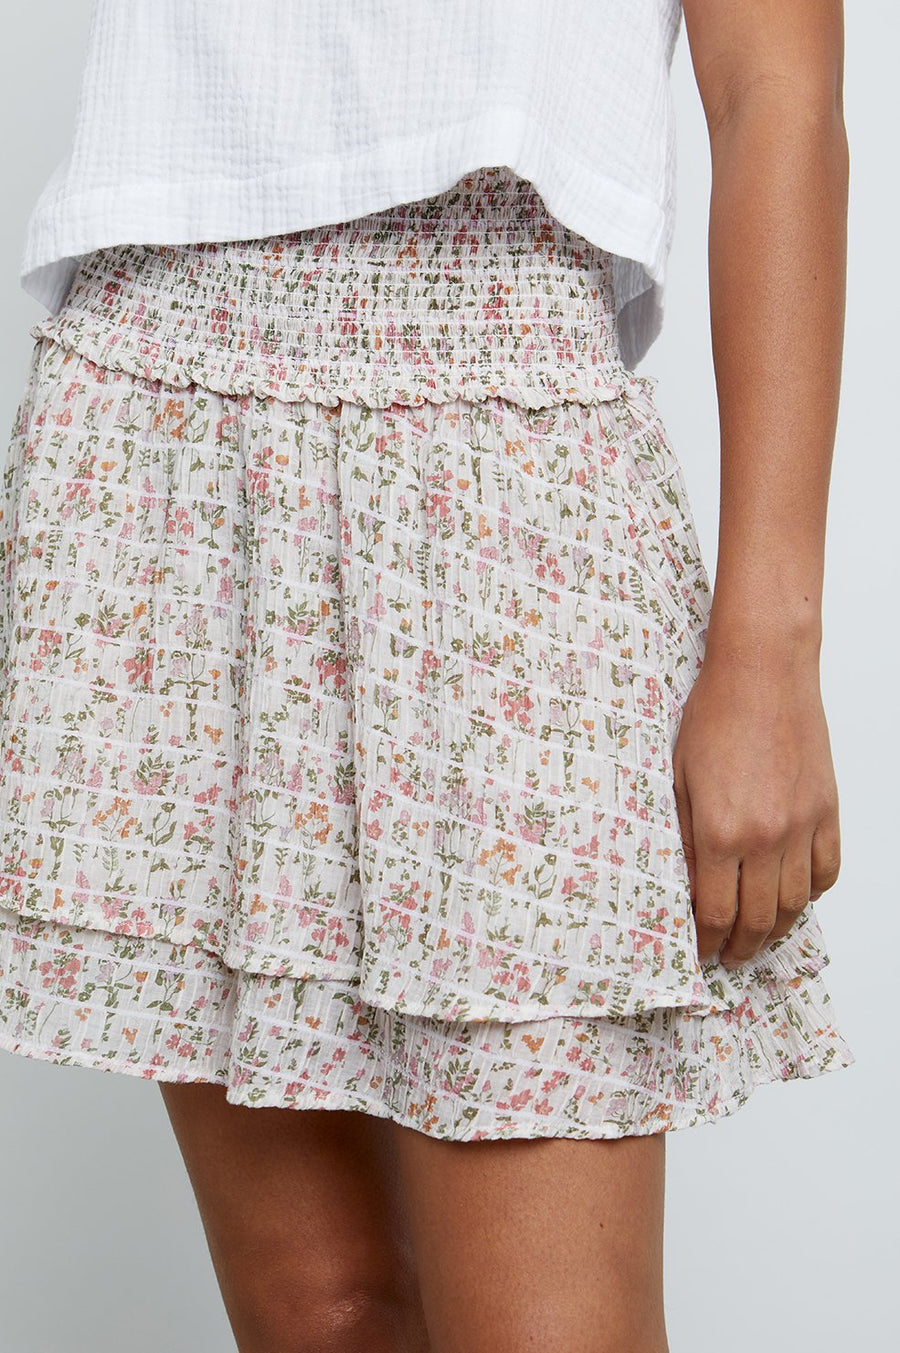 RAILS Addison Skirt in Ambrosia - Extra Small only